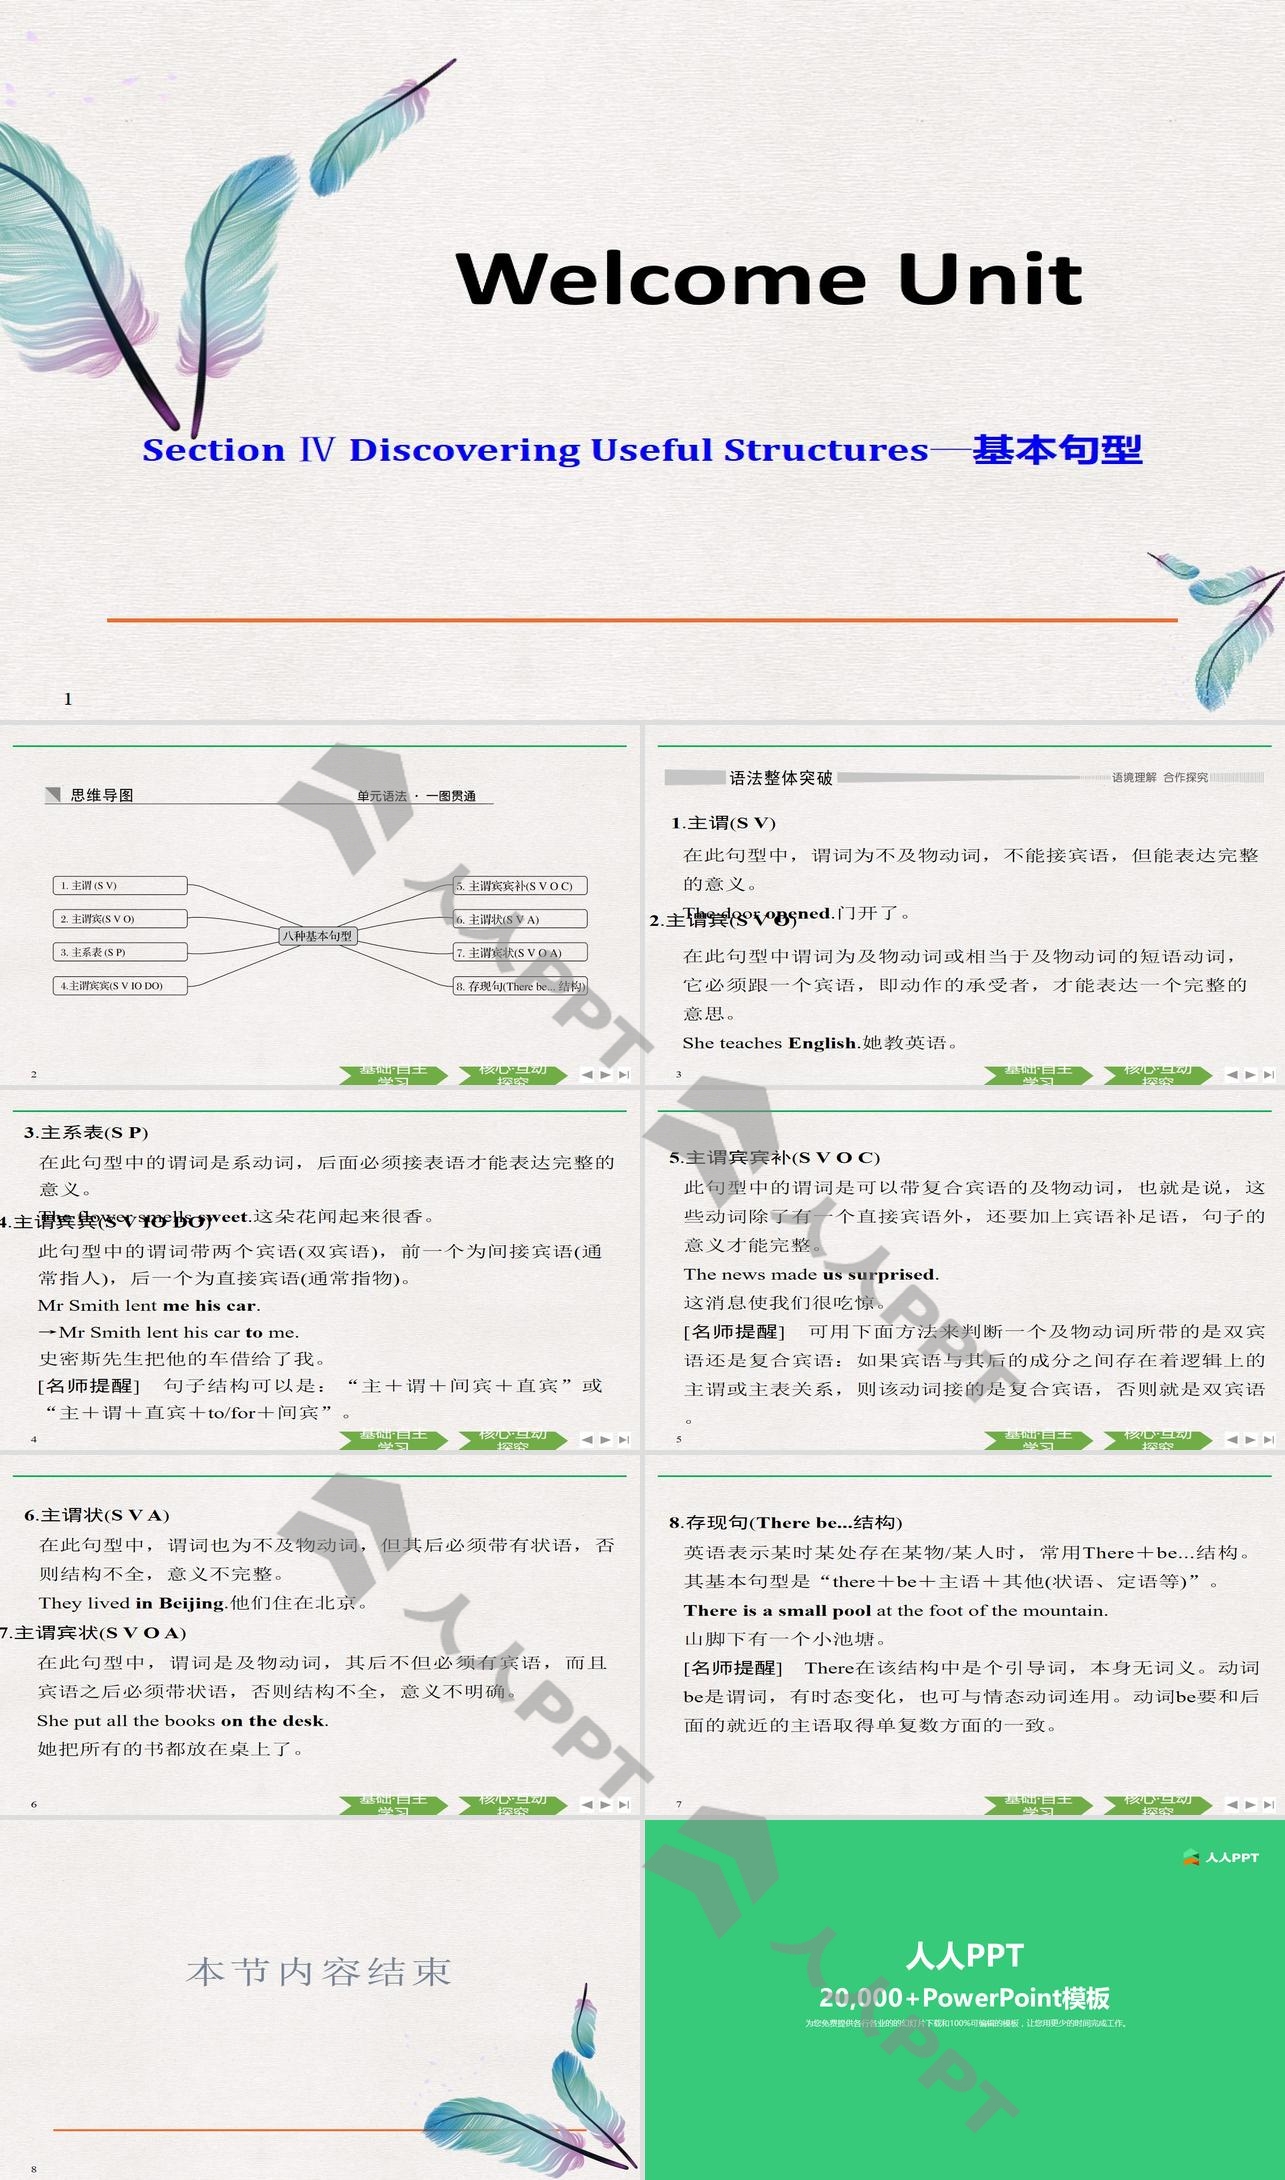 《Welcome Unit》Discovering Useful Structures PPT长图